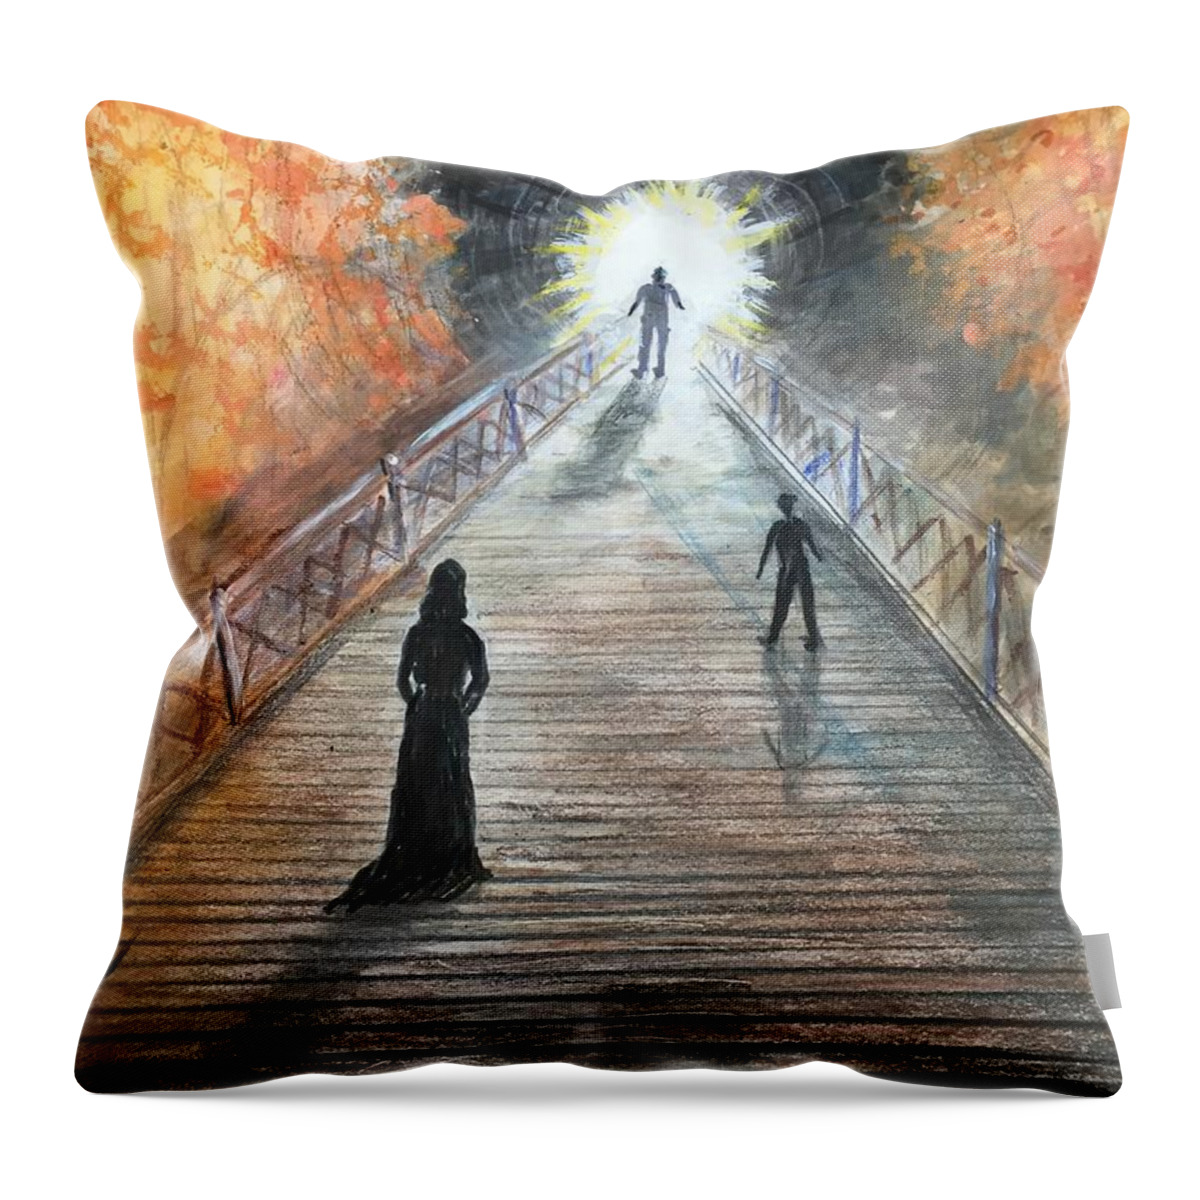 Crossing Over Throw Pillow featuring the painting Crossing Over by Ronnie Egerton